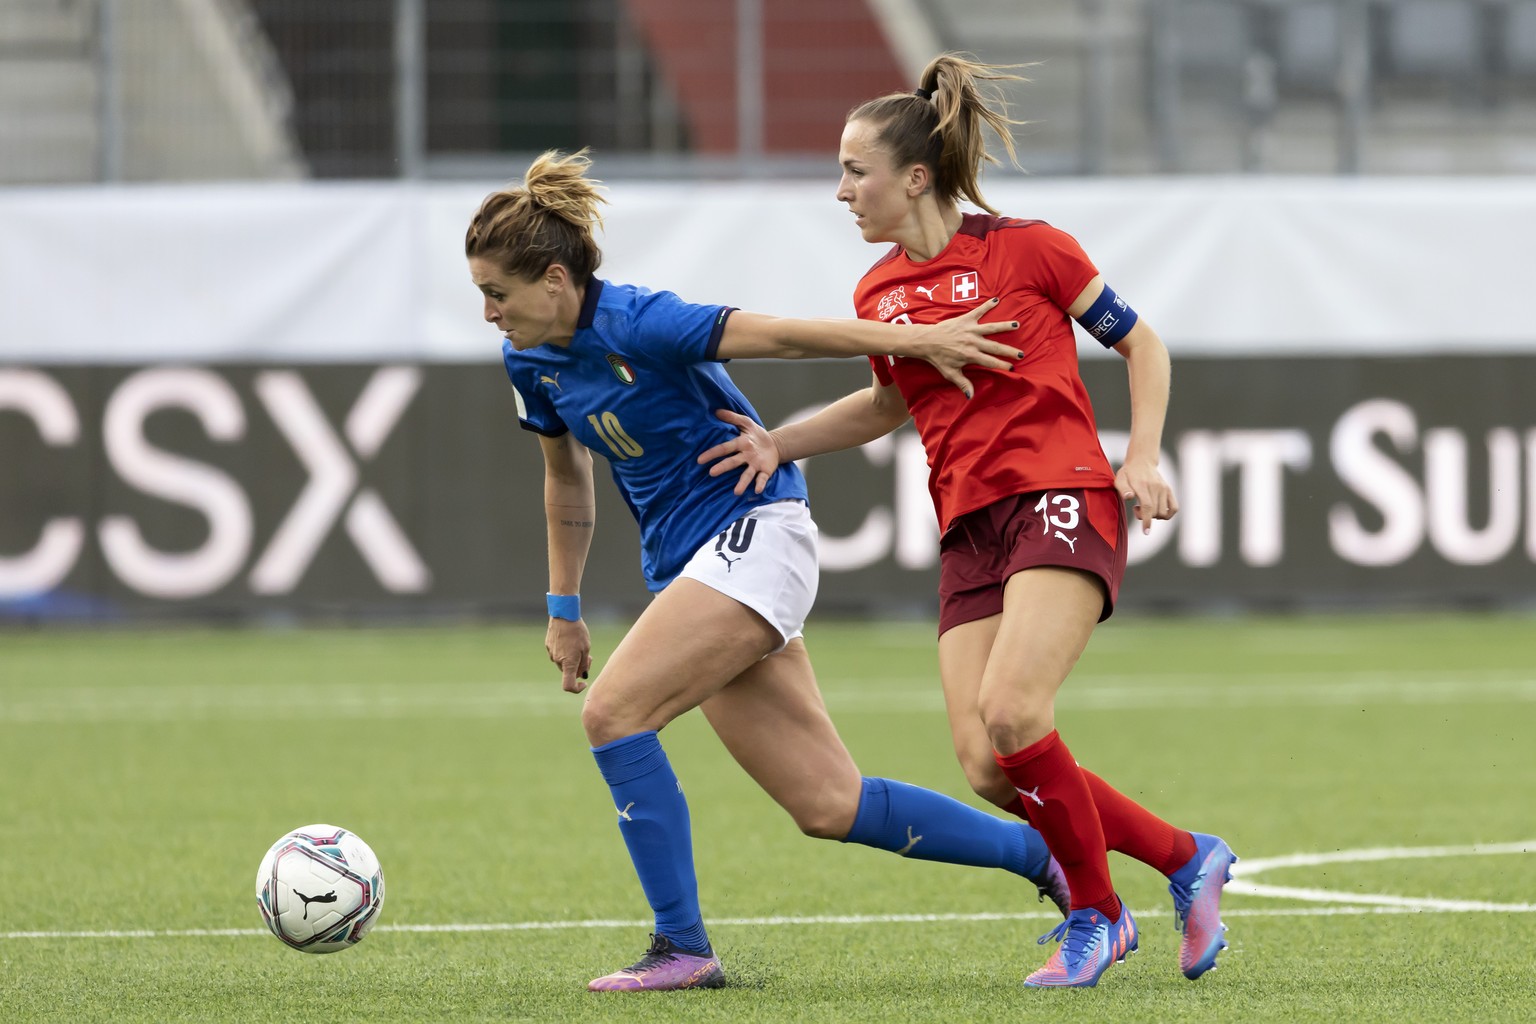 Italy's forward Cristiana Girelli, left, fights for the ball with Switzerland's midfielder Lia Waelti, right, during the FIFA Women's World Cup 2023 qualifying round group G soccer match between the n ...